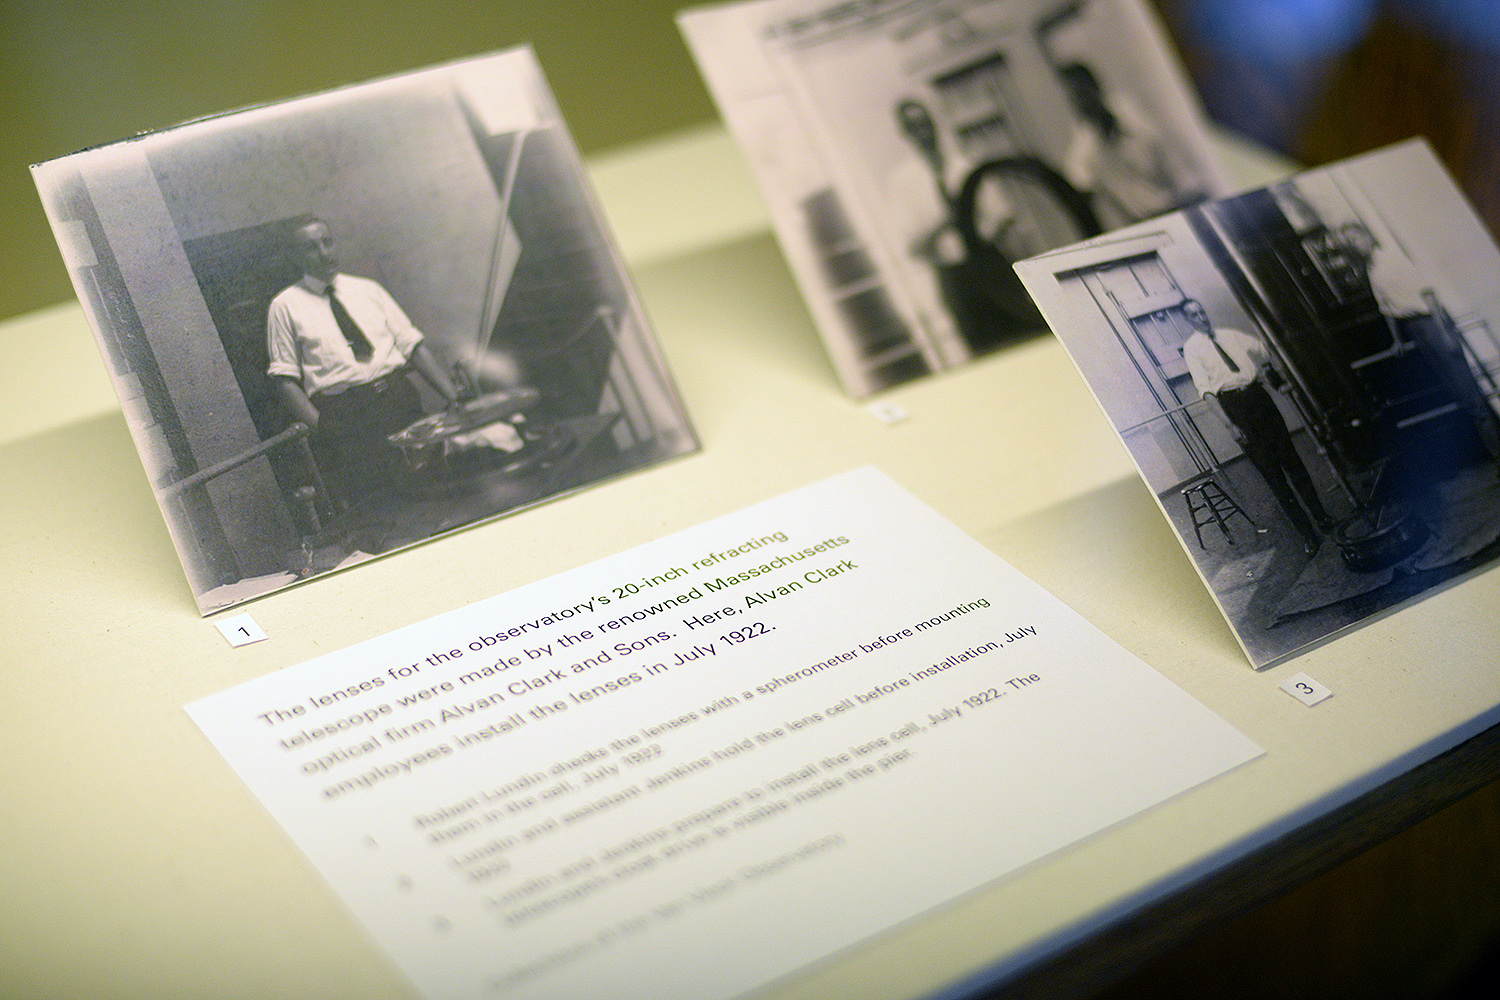 Photographs on display in the exhibit included shots of employees of the renowned optical firm Alvan Clark and Sons installing lenses on the observatory's 20-inch refracting telescope in July 1922.